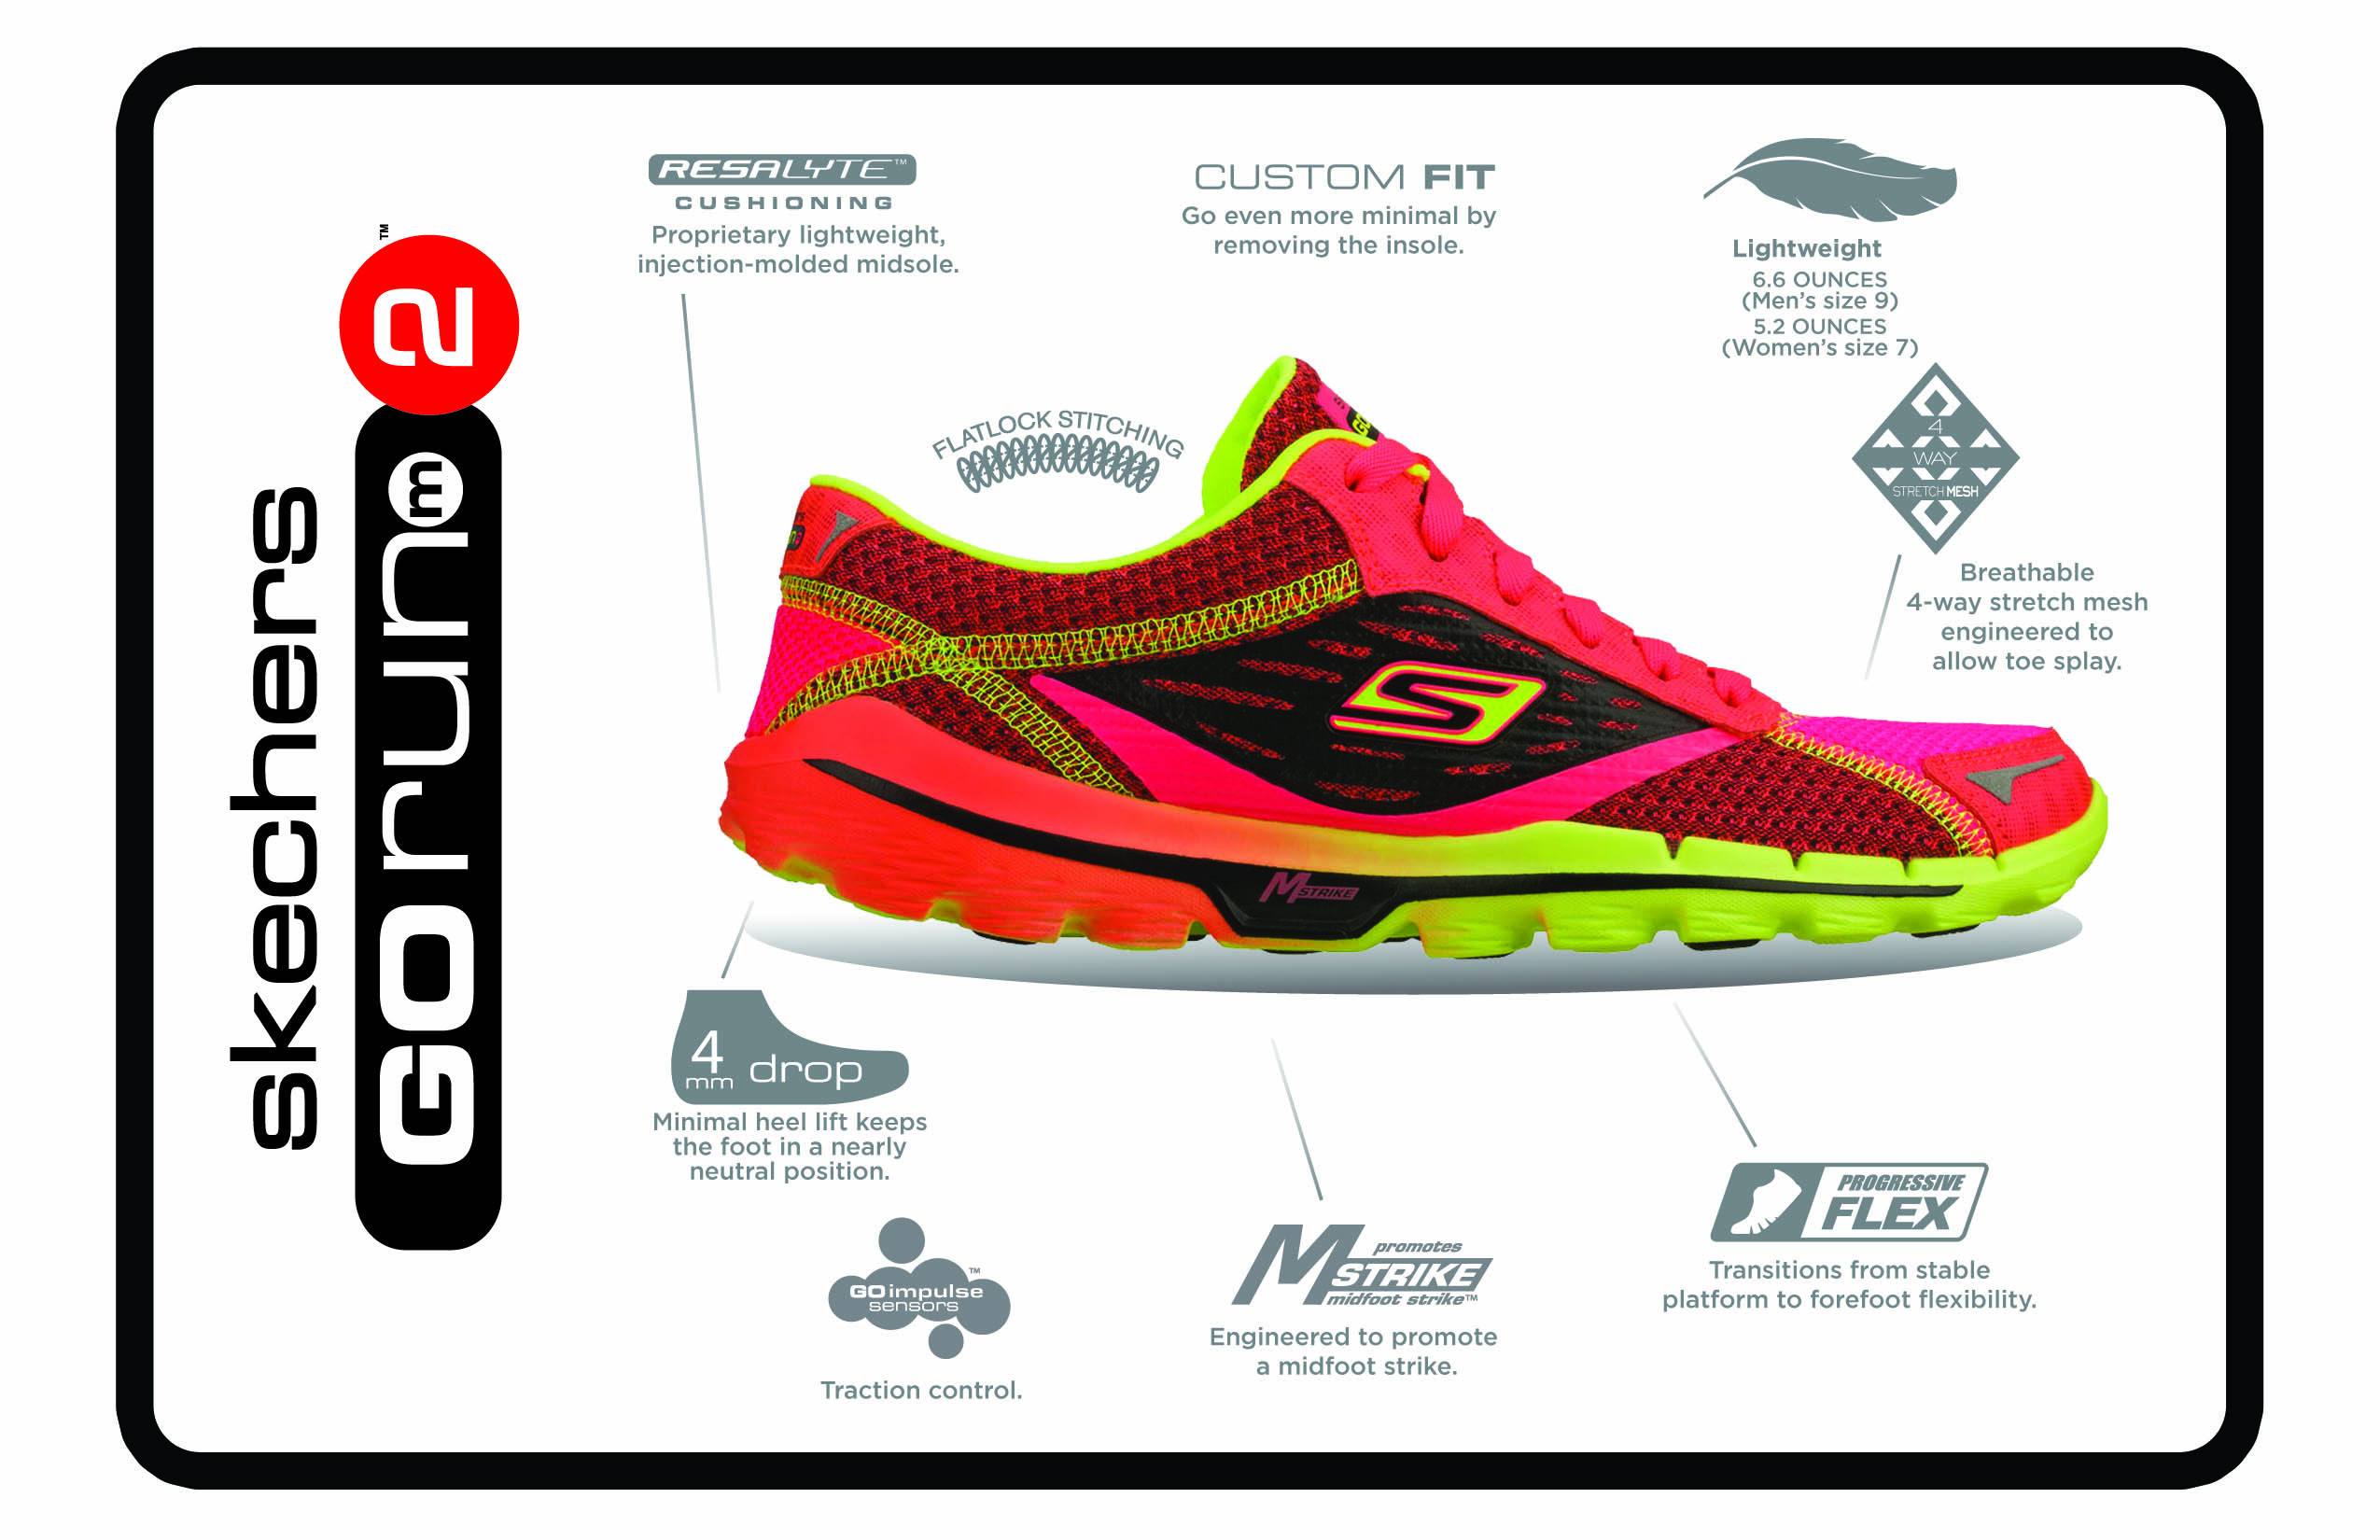 Skechers GO Run2: Run Faster with a 